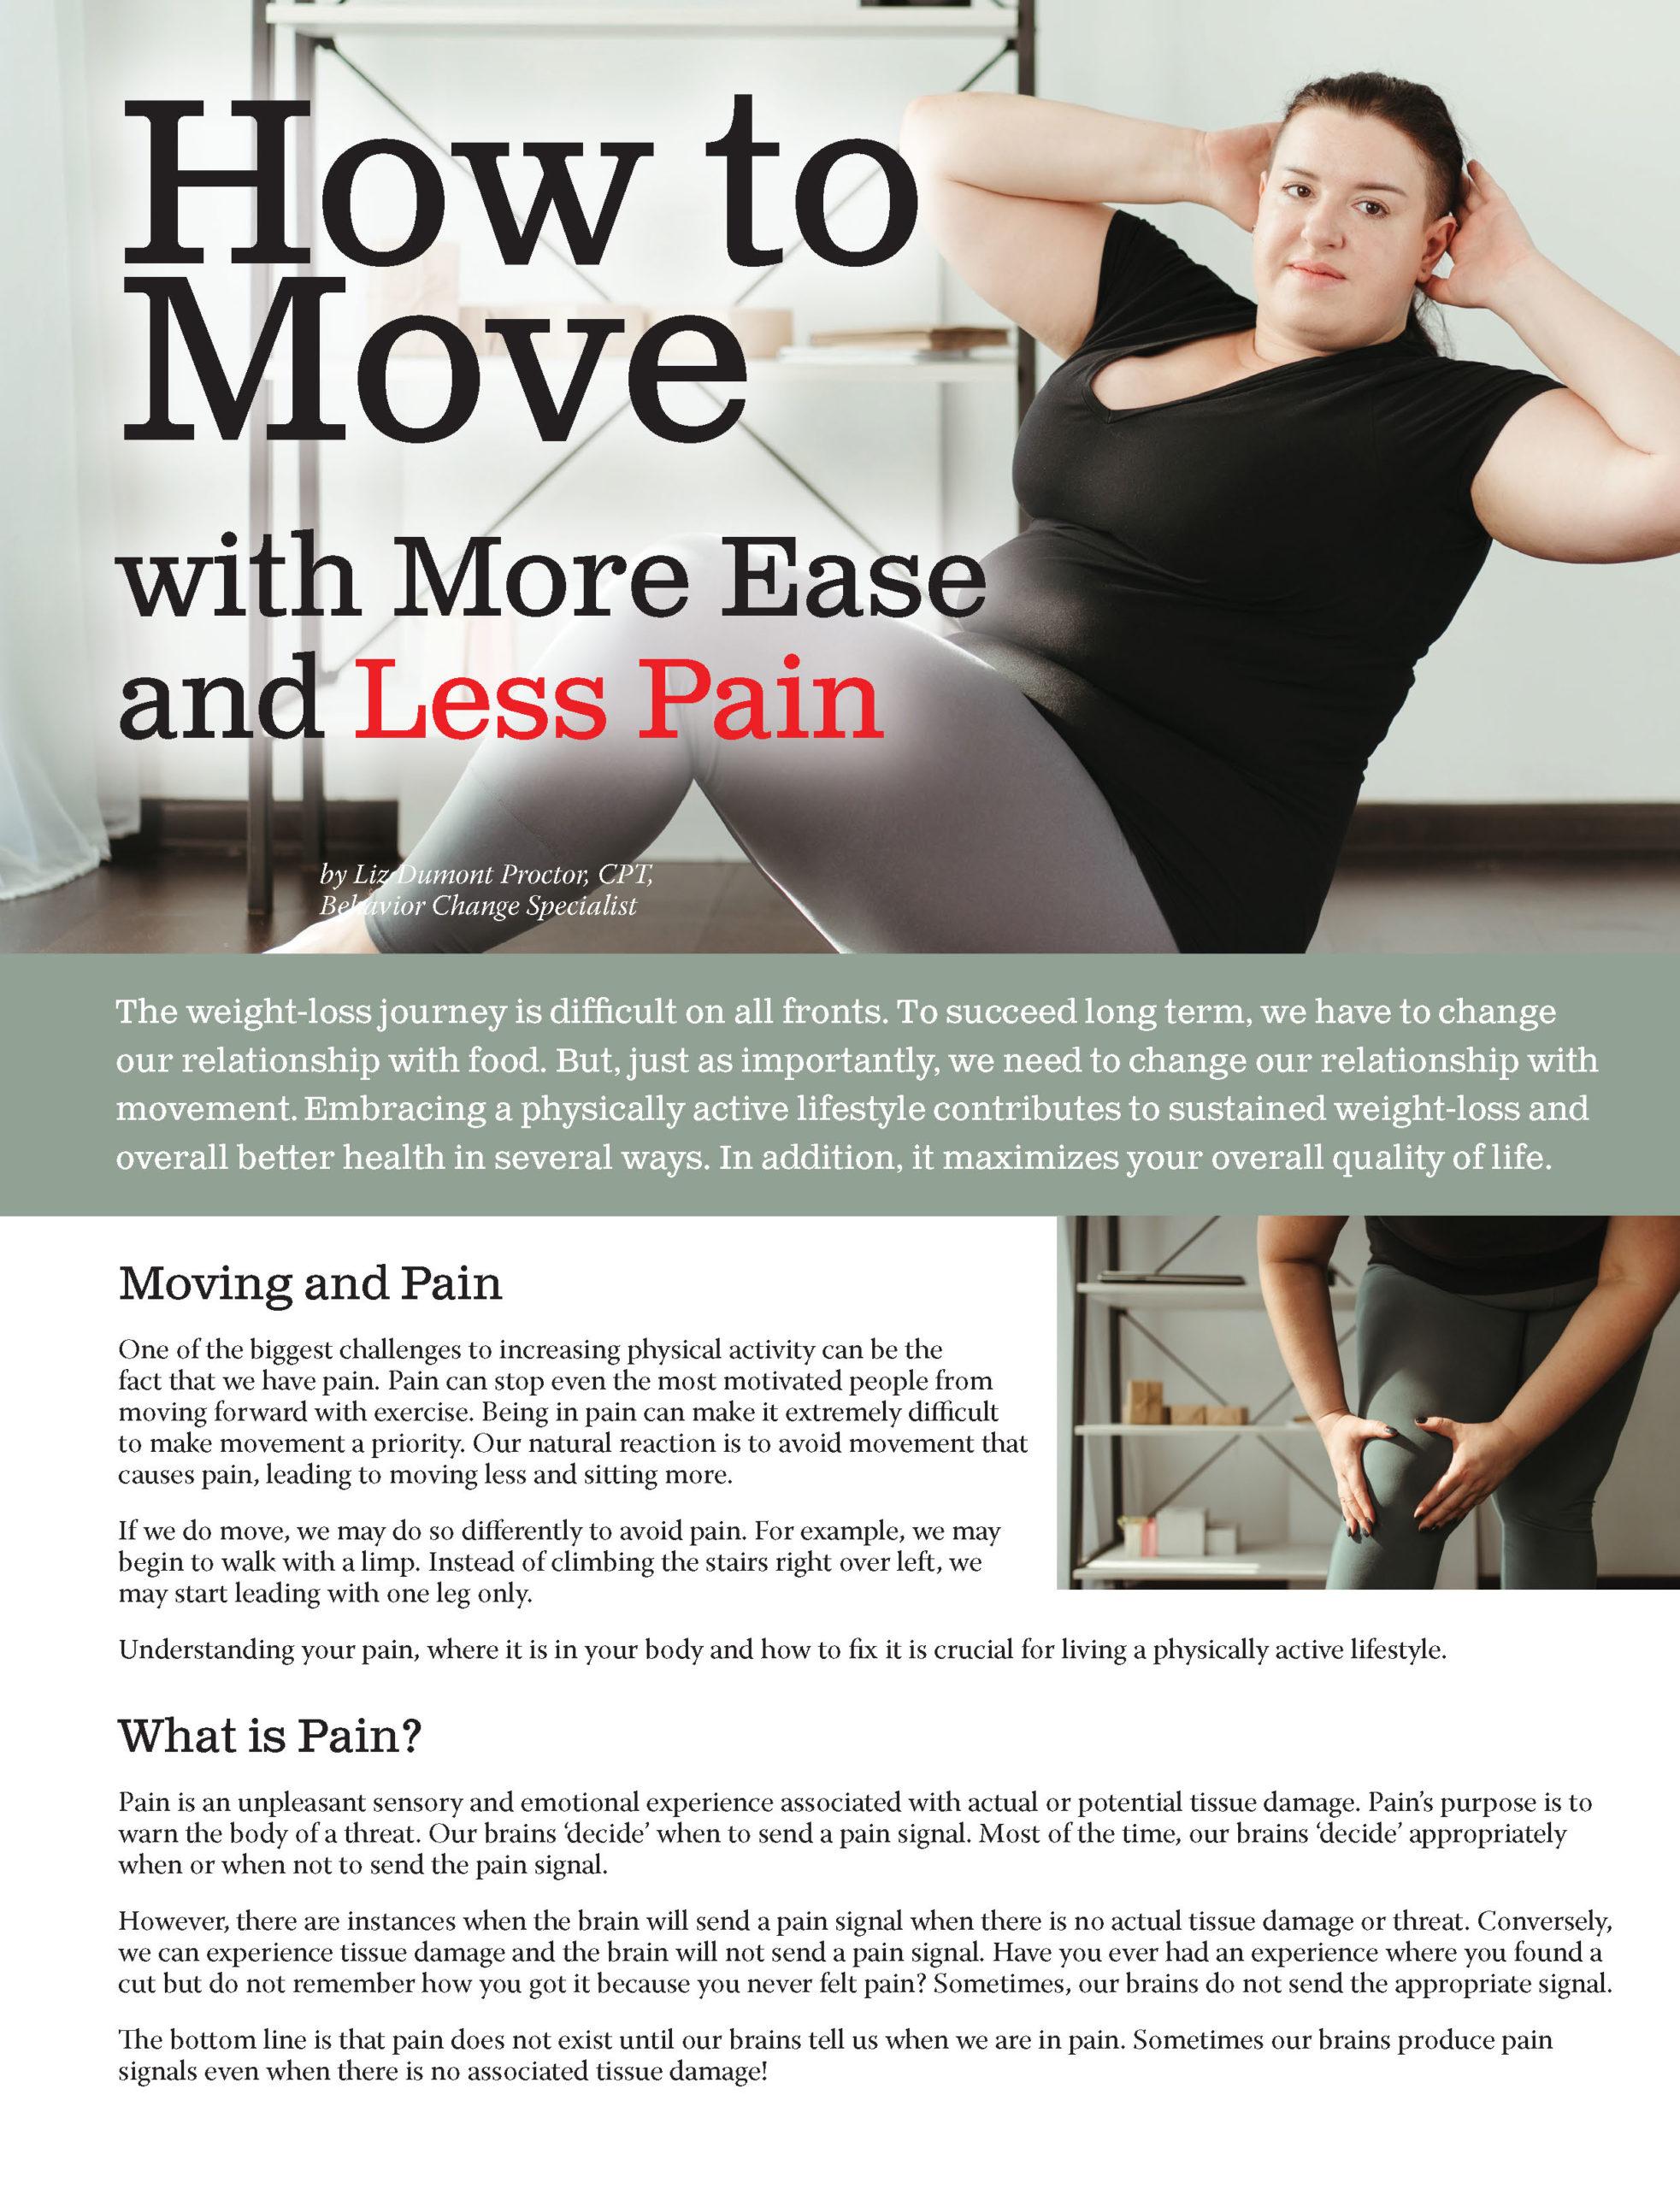 Professional Physical Therapy - Hip Pain from Sitting and What You Can Do  About It